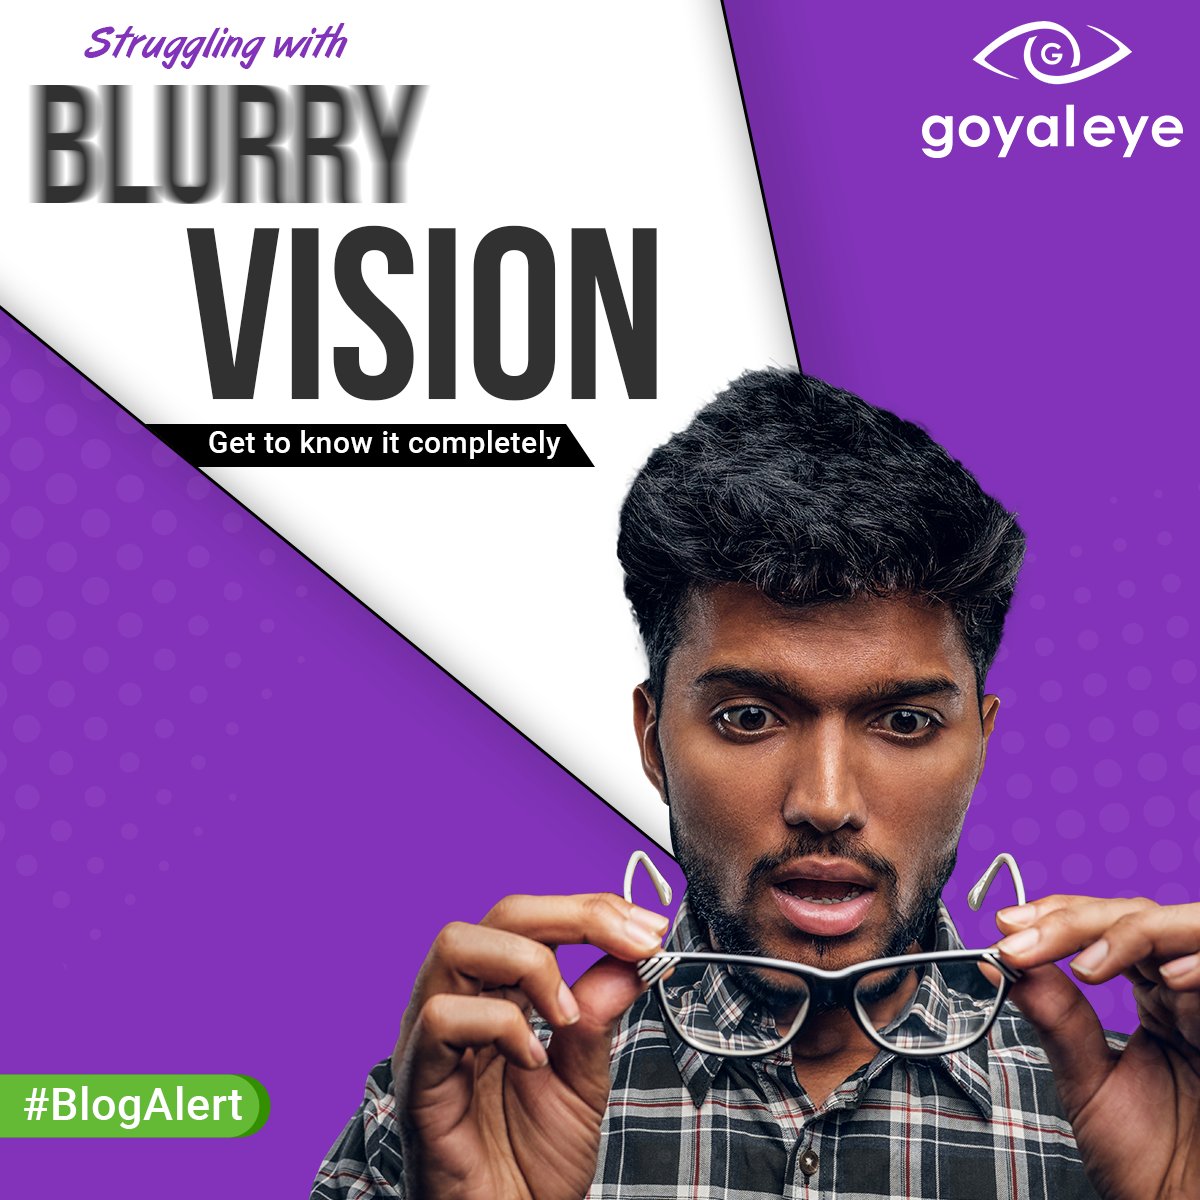 Is your vision becoming increasingly blurry? 

Don't ignore this alert! 

To find out more about blurry vision and how to maintain healthy vision, see our most recent blog post. 

To Know more about Blurry-Vision, check: goyaleye.com/blurry-vision.…

#GoyalEye #BlurryVision